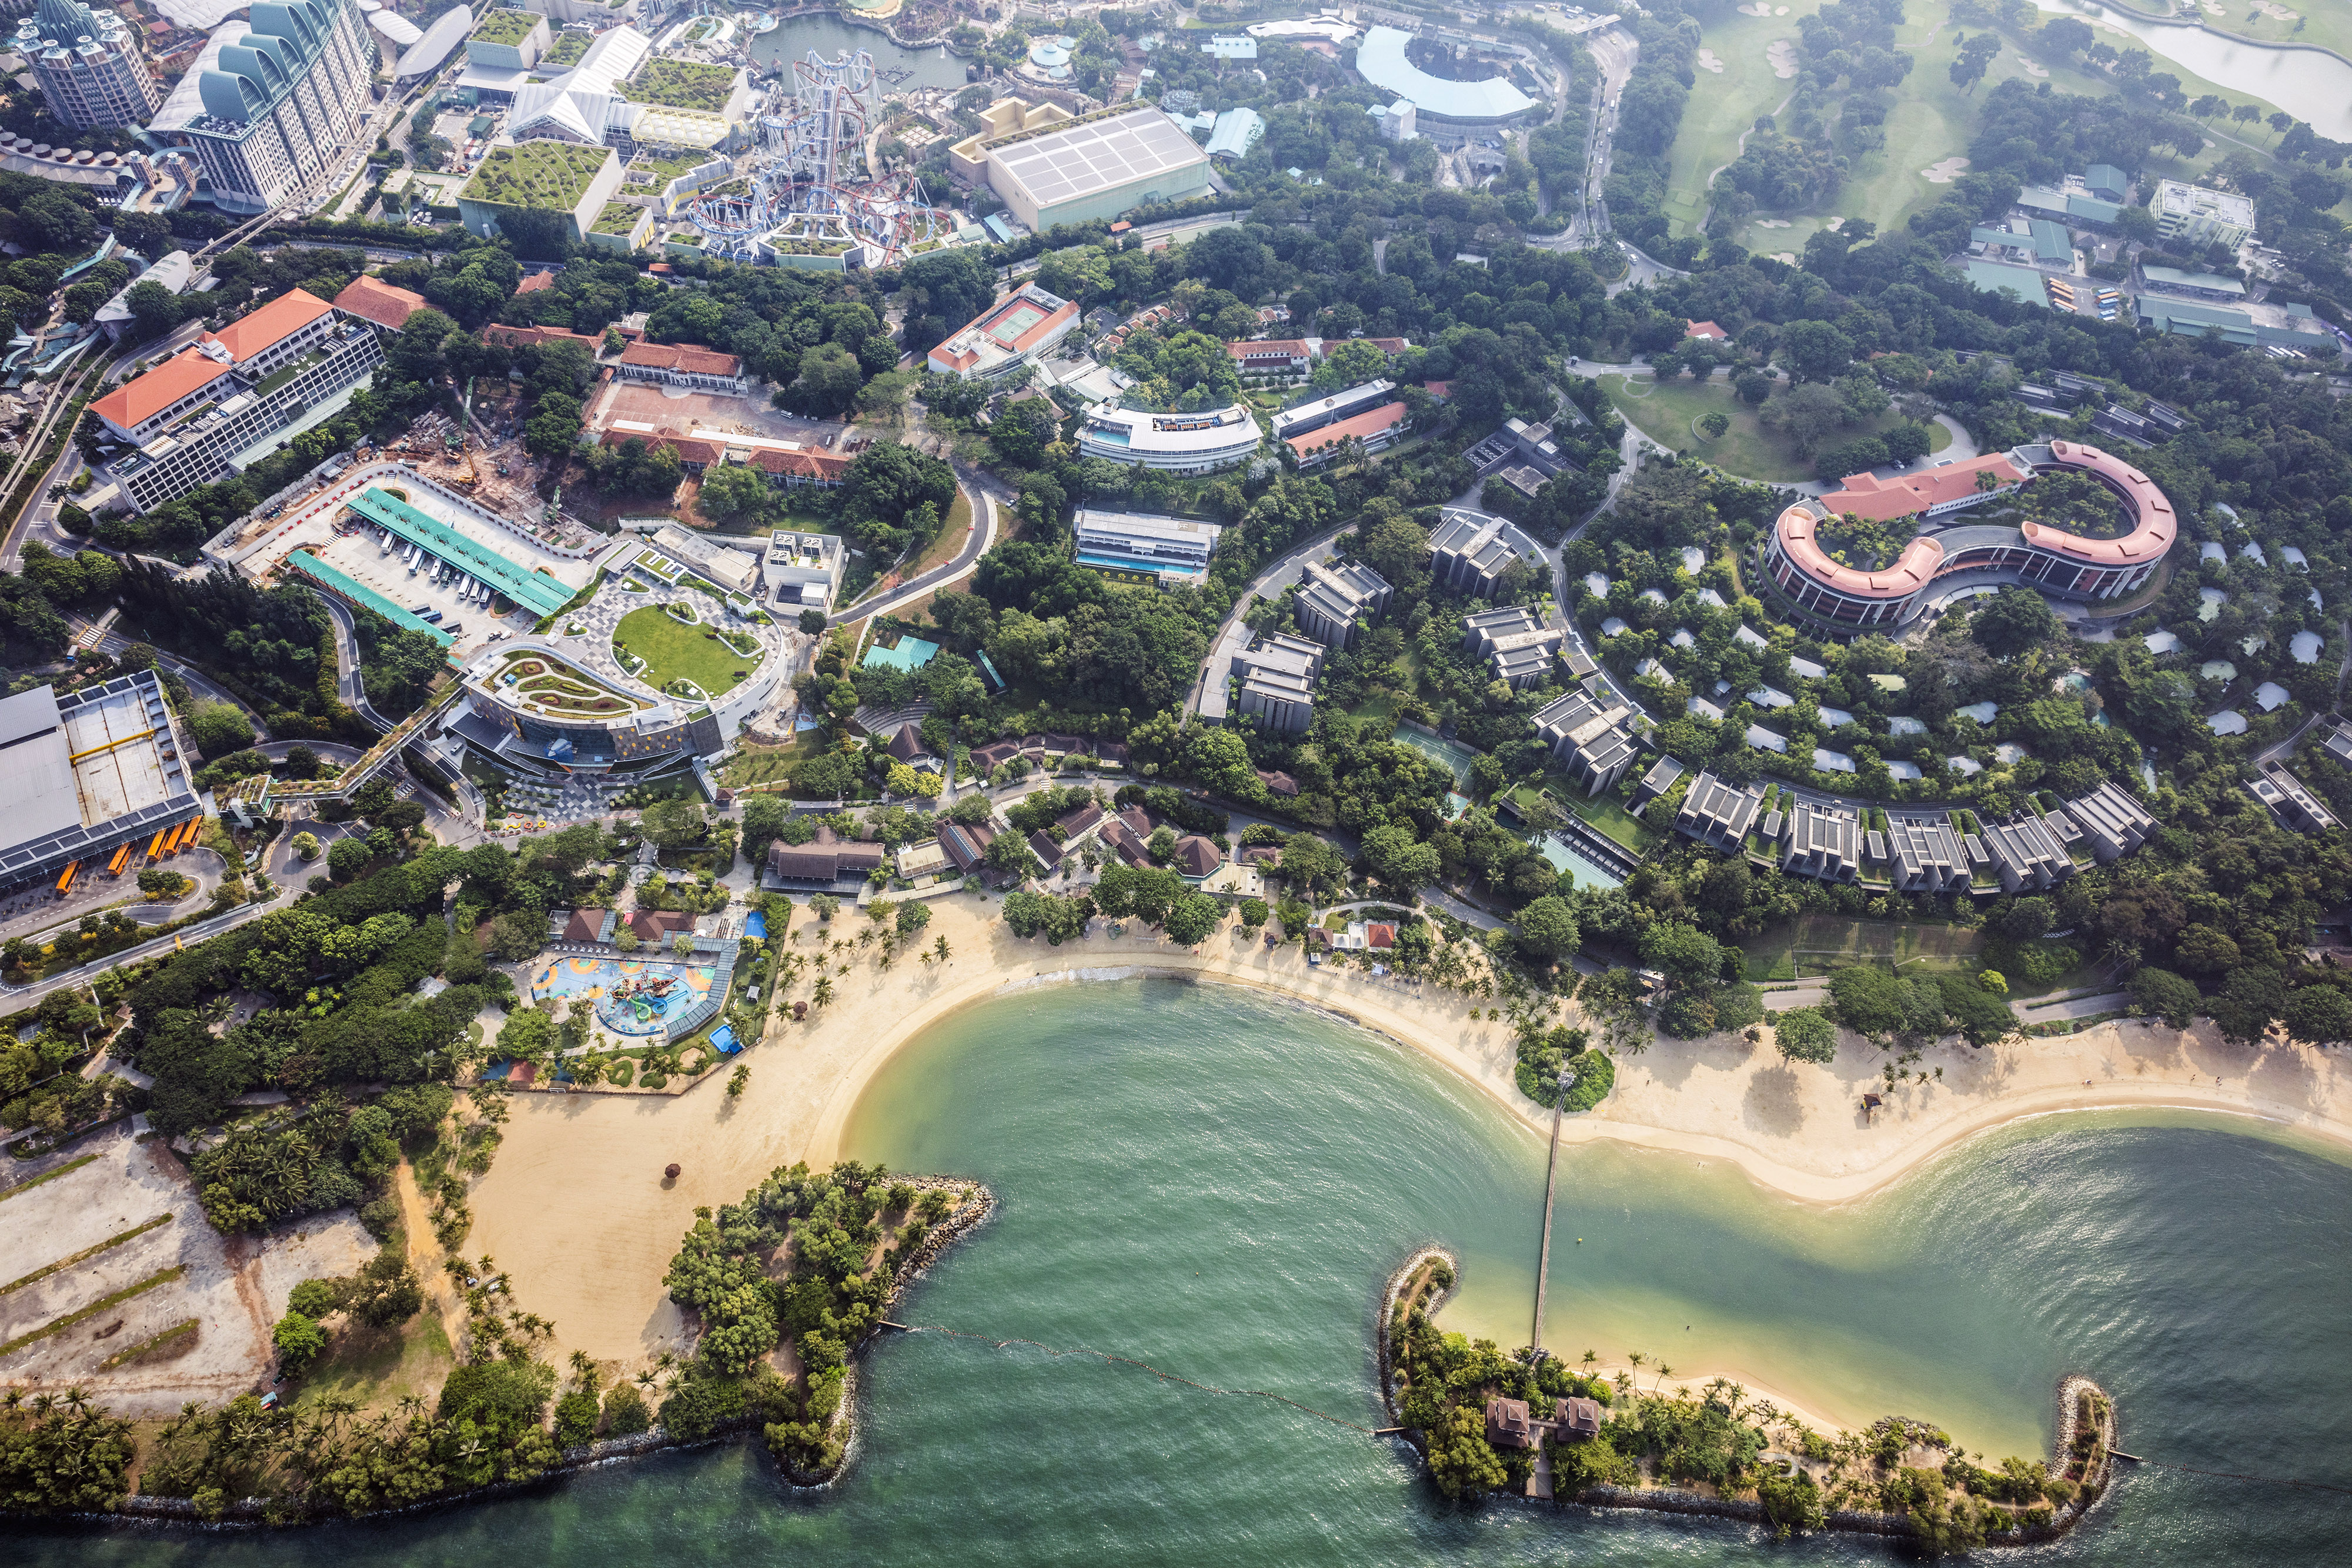 Palawan Beach stands among other attractions at the Resorts World Sentosa integrated resort and casino complex, operated by Genting Singapore Plc. on Sentosa Island in this aerial photograph taken above Singapore, on Thursday, July 2, 2015. (Darren Soh — Bloomberg via Getty Images)